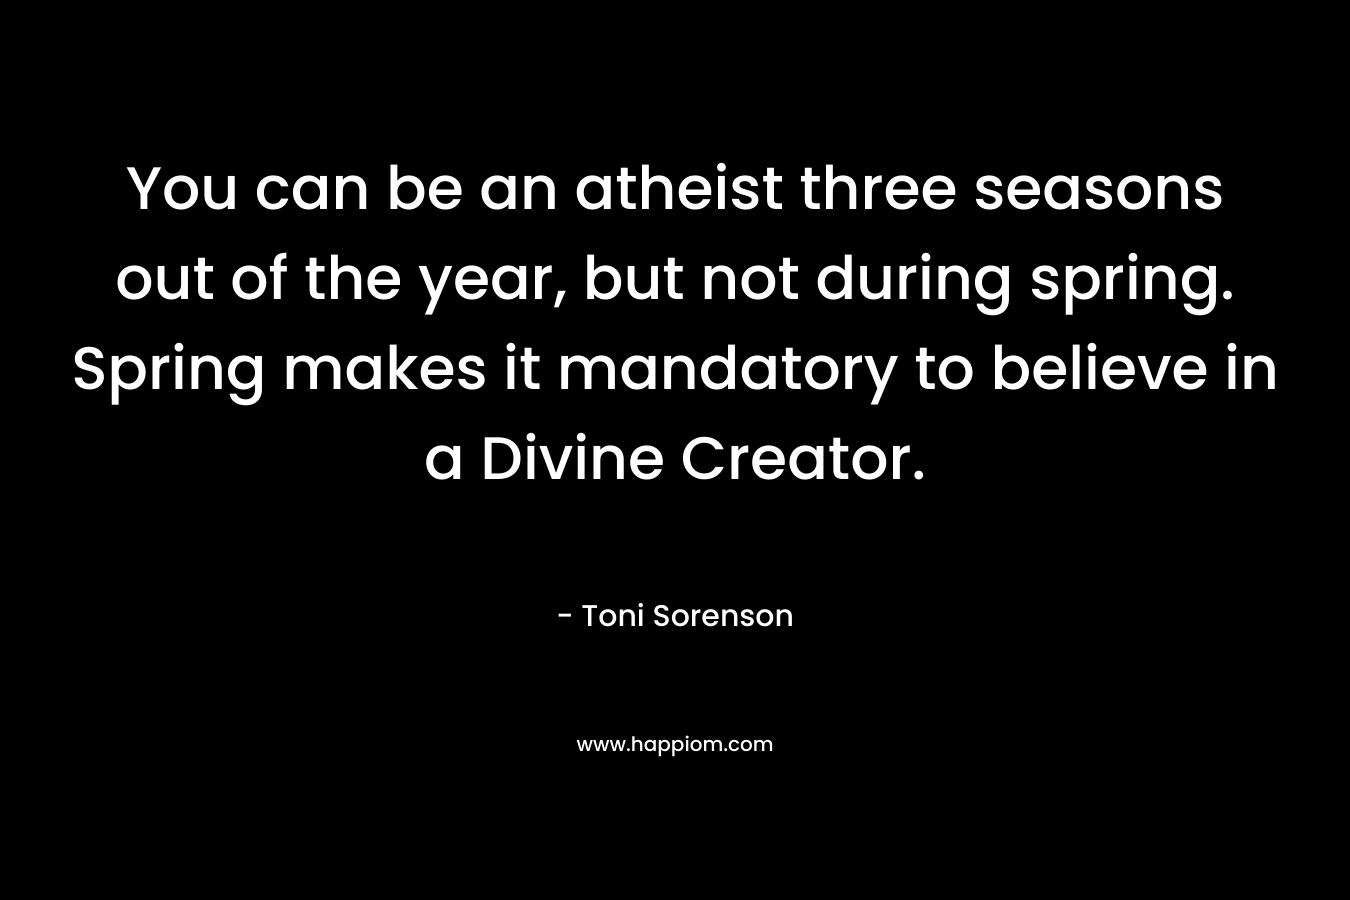 You can be an atheist three seasons out of the year, but not during spring. Spring makes it mandatory to believe in a Divine Creator.